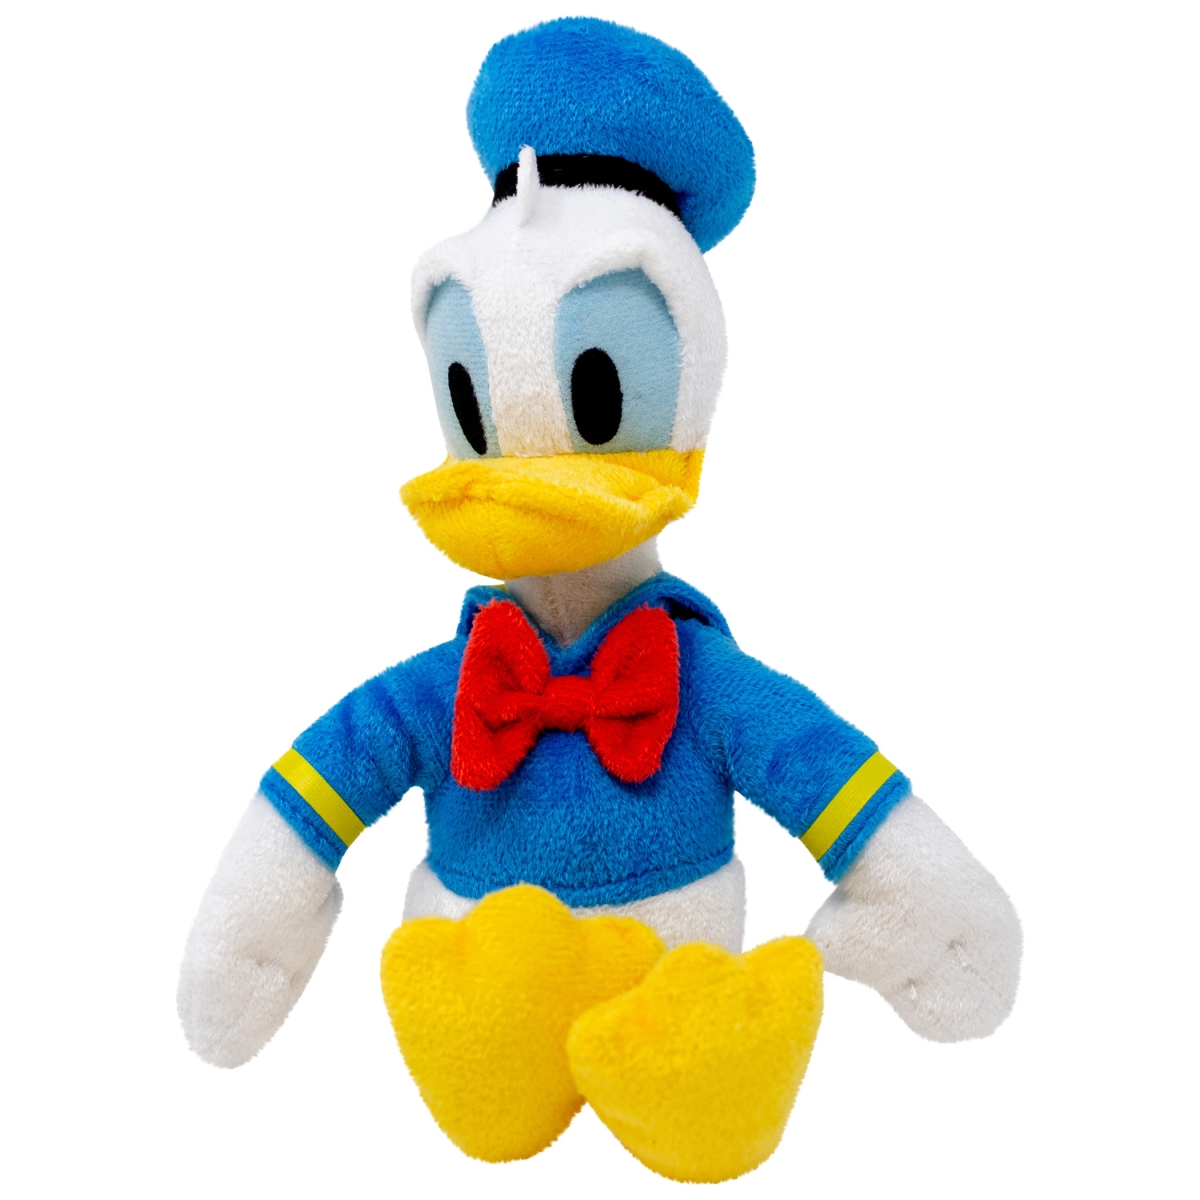 washable weighted buddy 3 lbs Donald Duck or Daisy Duck sensory toy Weighted stuffed animal